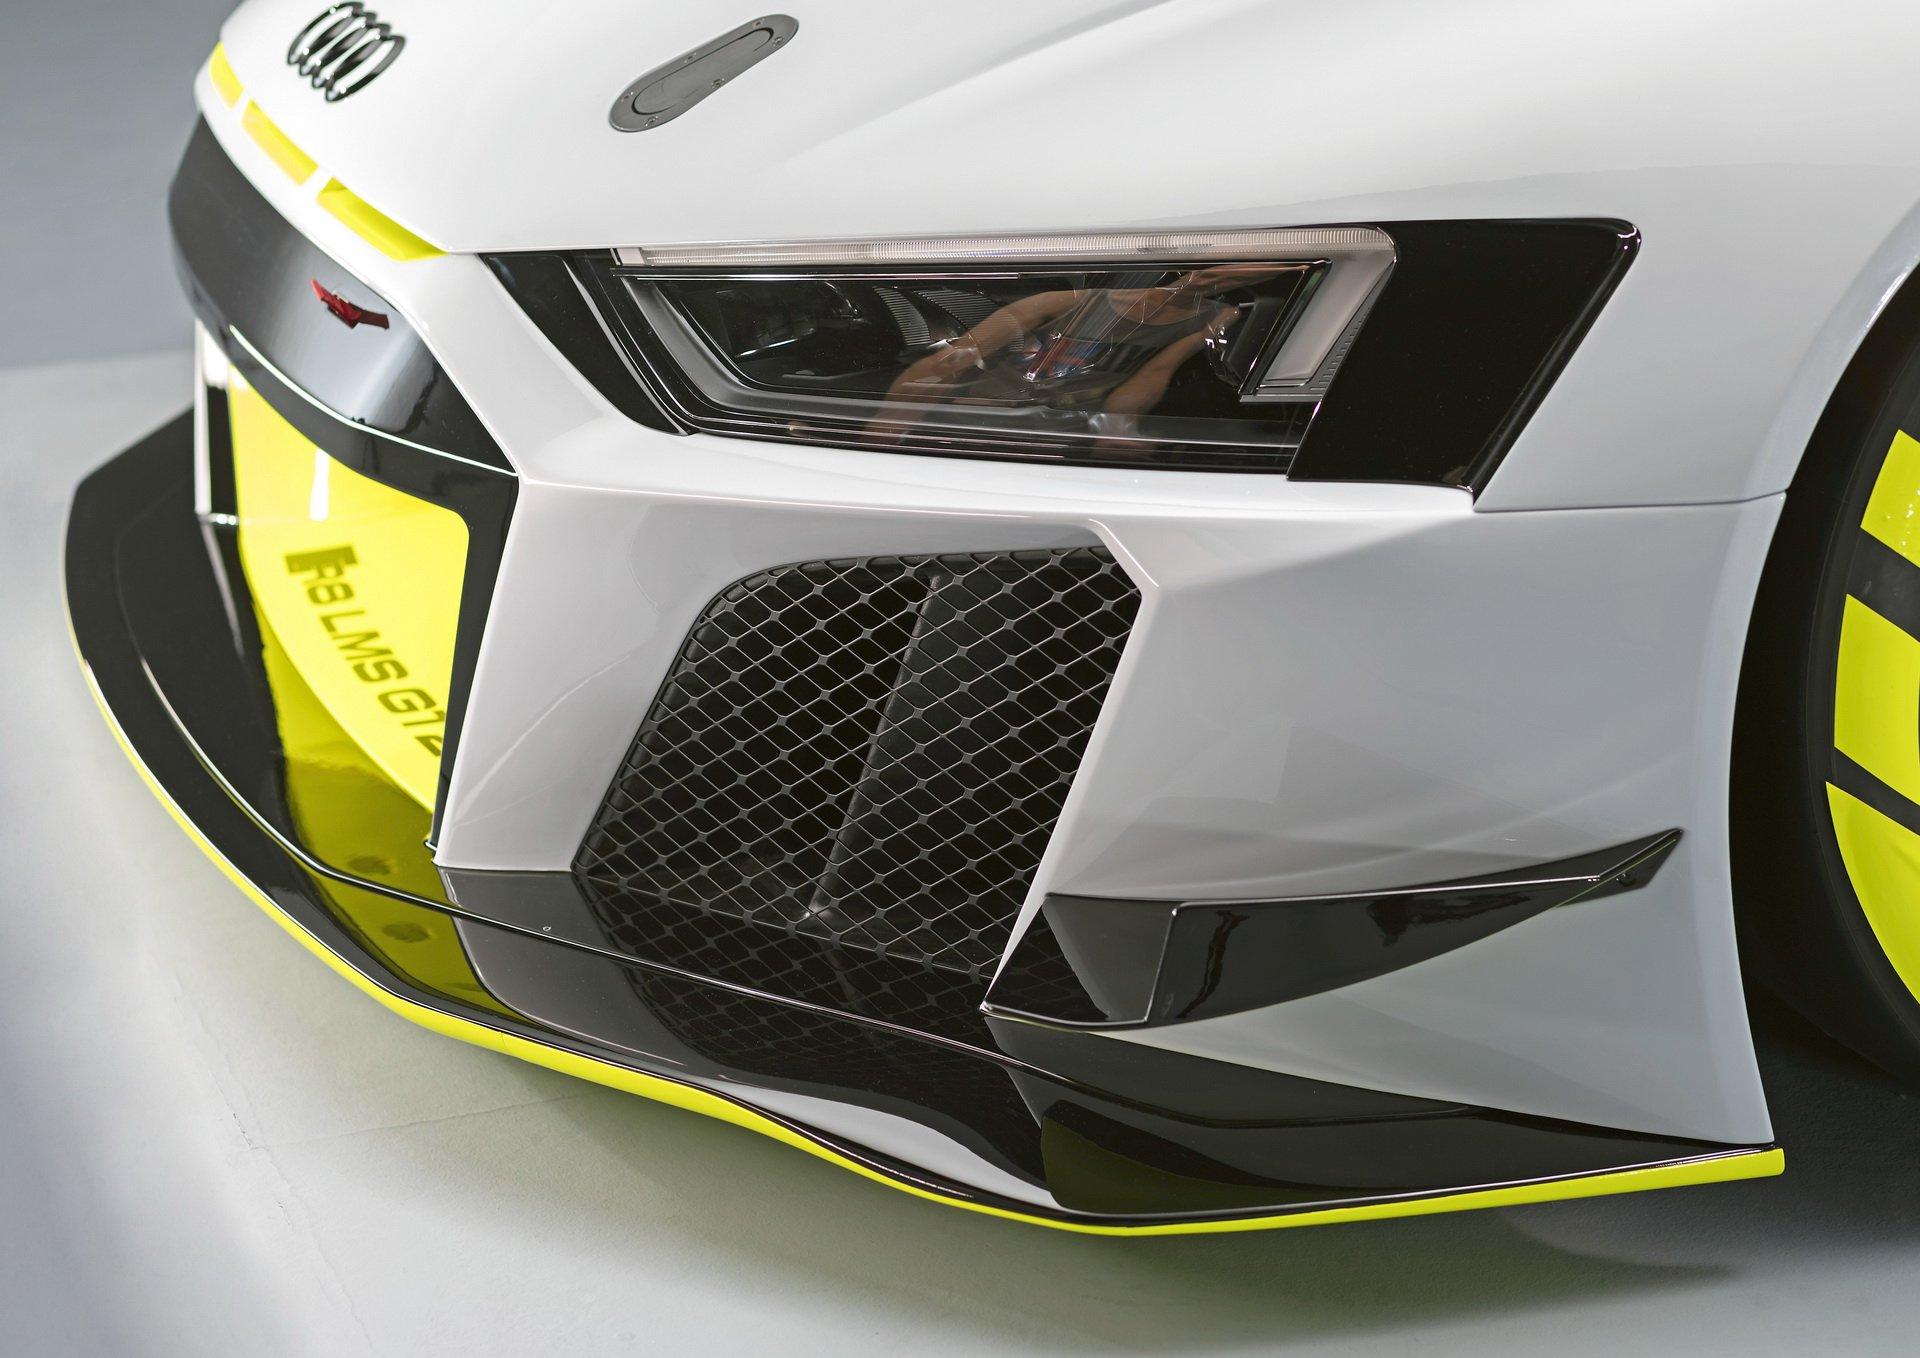 Audi R8 LMS GT2 Picture, price, Performance and specs